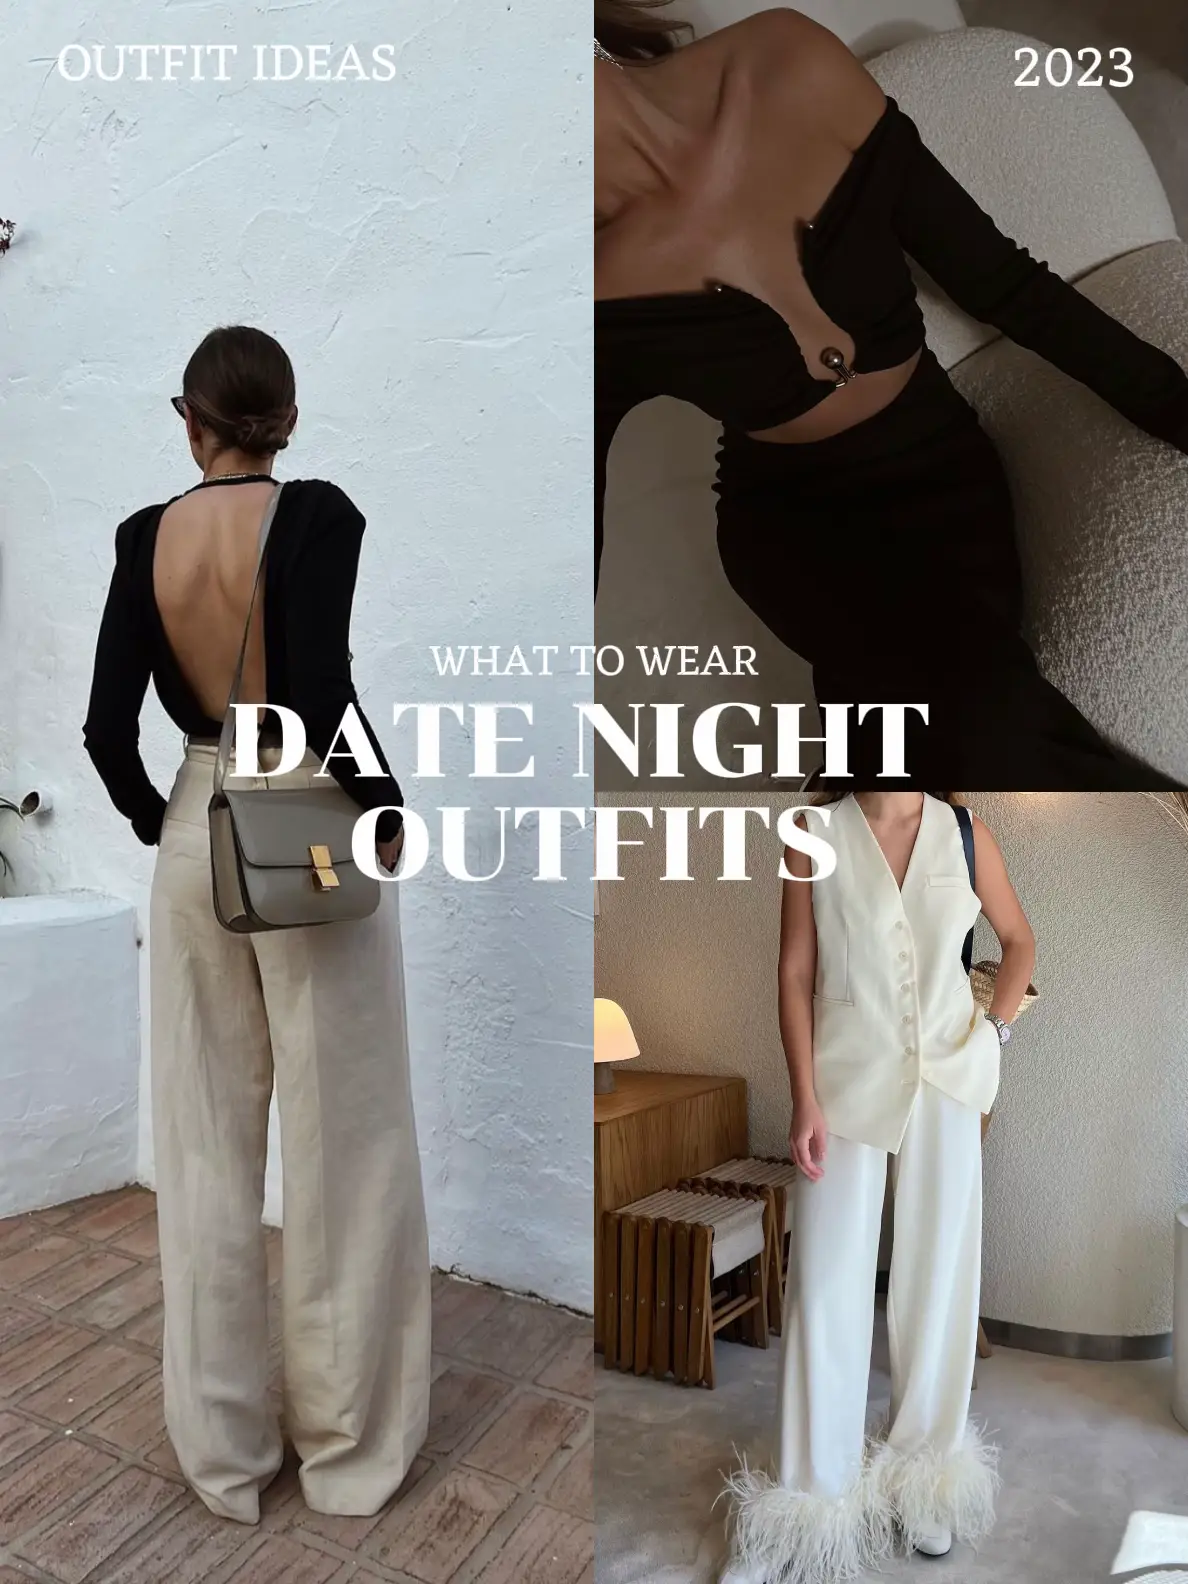 WHAT TO WEAR - DATE NIGHT OUTFITS